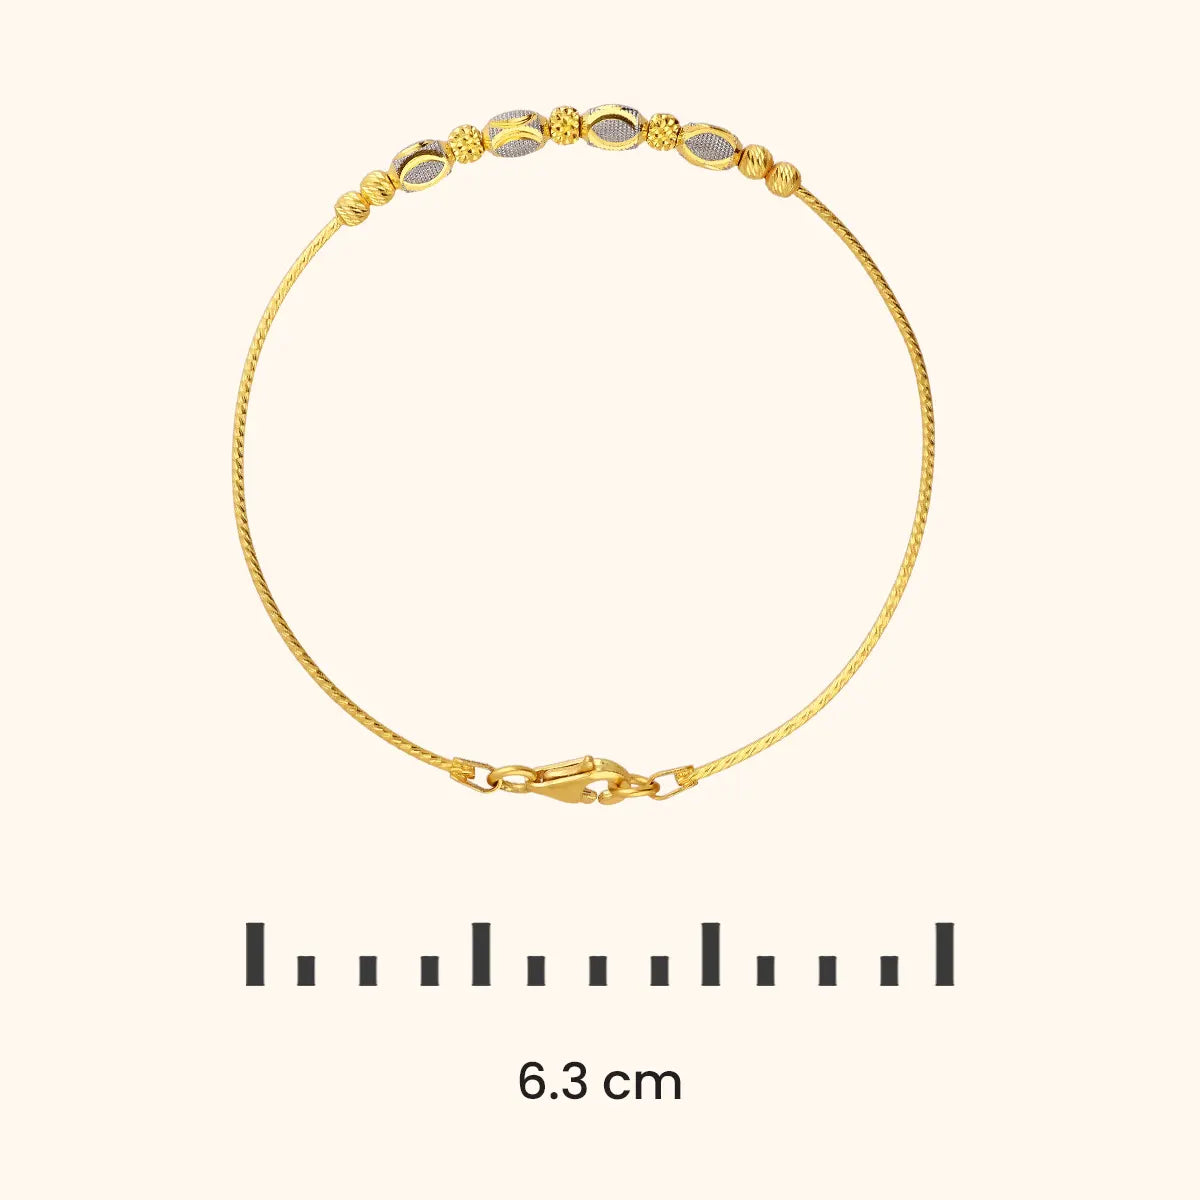 Buy VIPUNJ Premium Quality Yellow Gold Plated Bracelet For Men & Women | Stylish  Bracelet For Cool Look | Latest Charm Bracelet | Gold Bracelets Online at  Best Prices in India - JioMart.